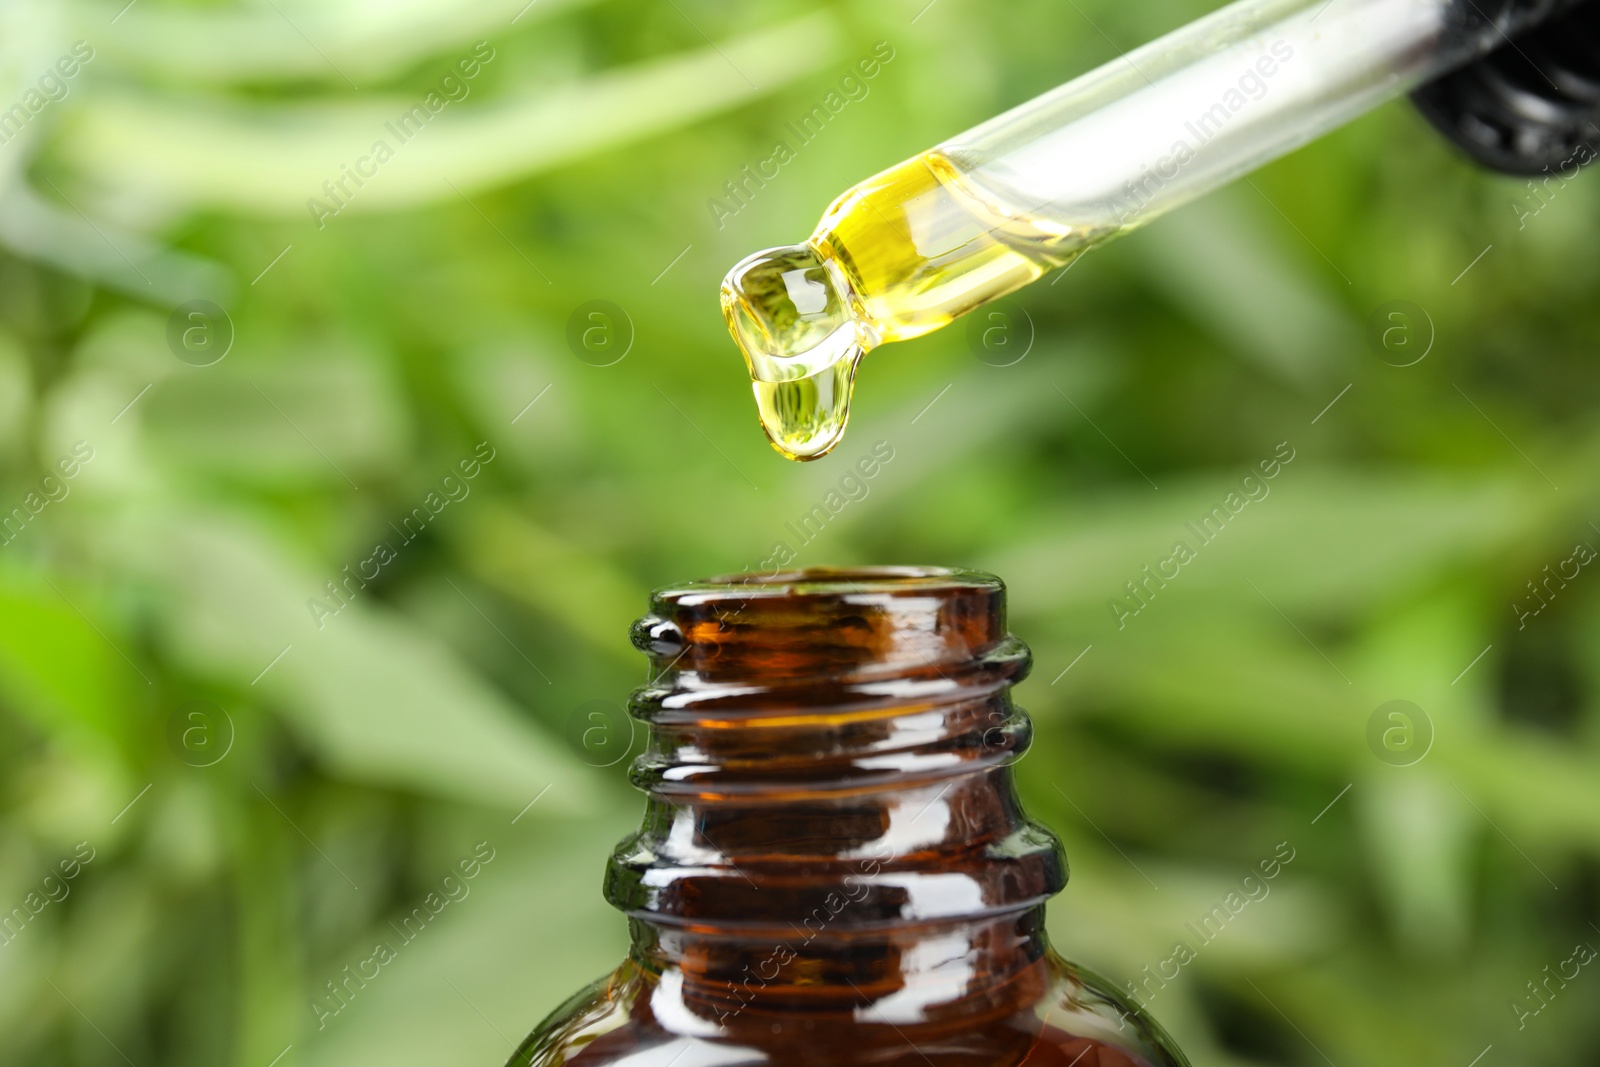 Photo of Dripping essential oil from pipette into glass bottle against blurred green background, closeup